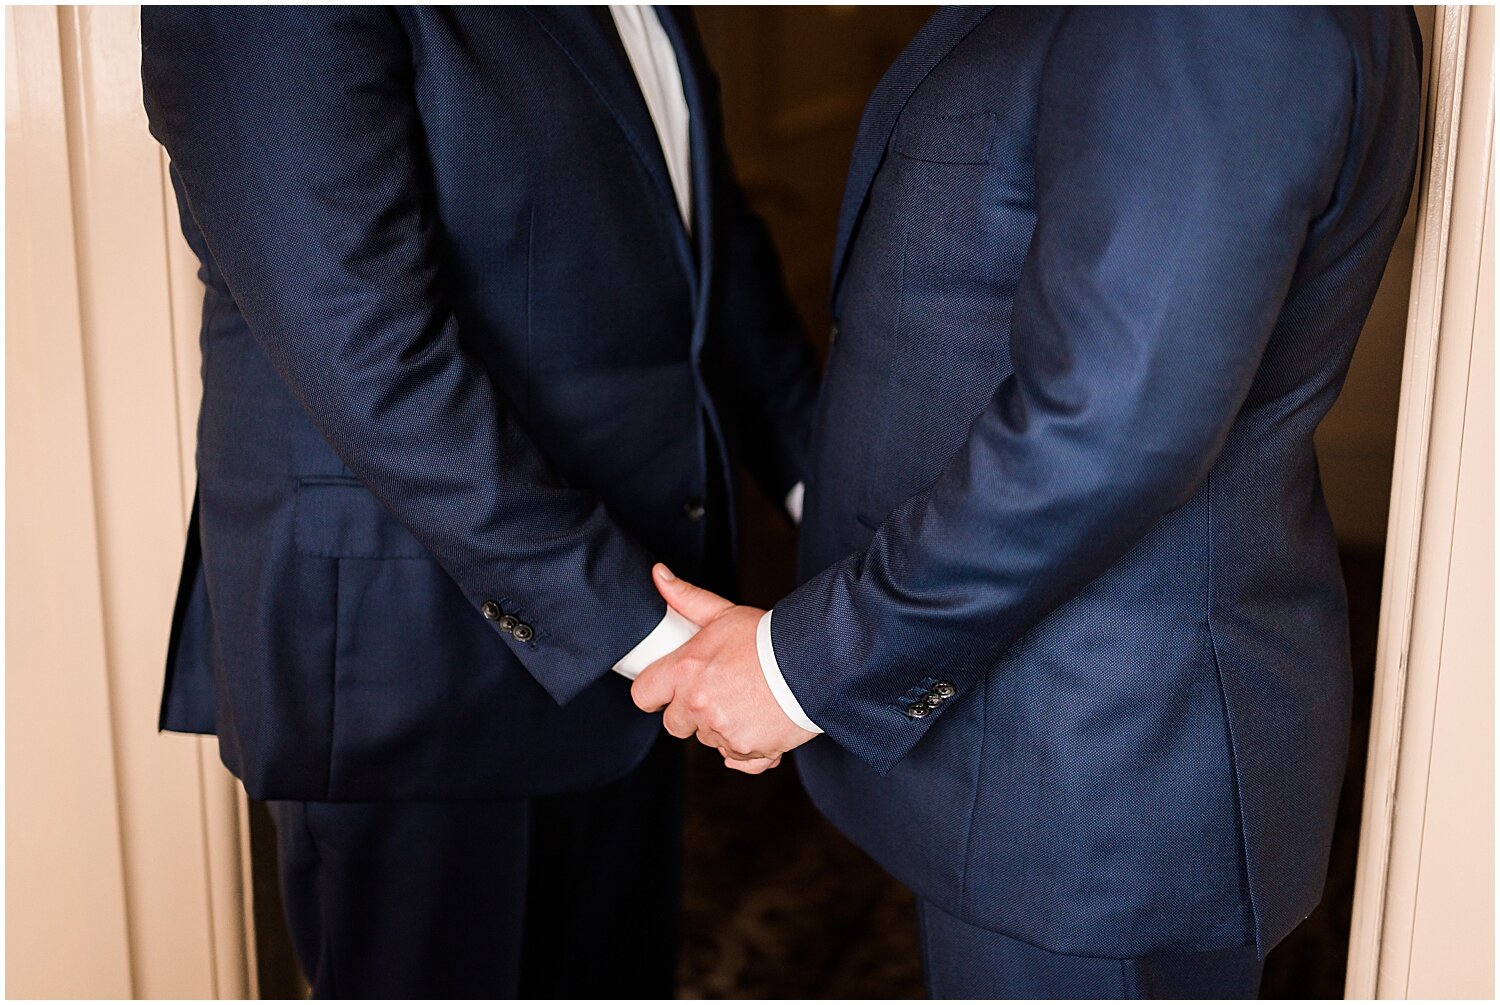  grooms holding hands before their wedding ceremony 